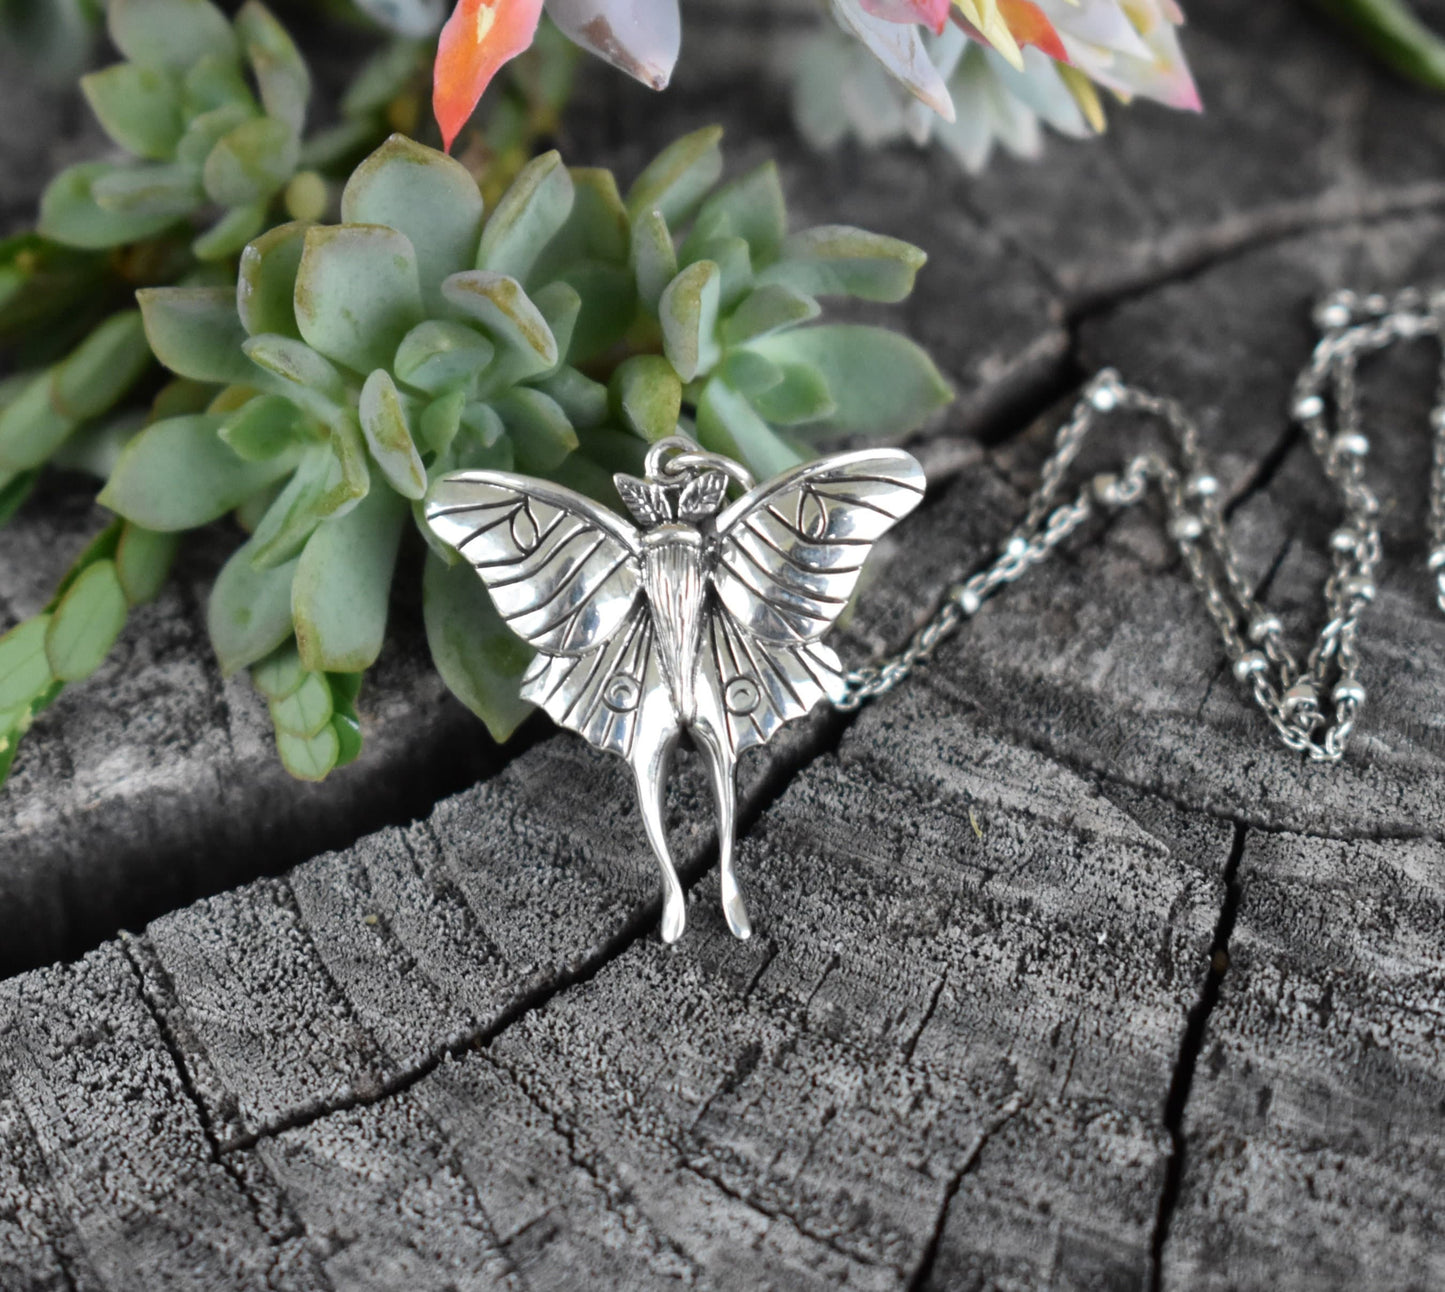 Luna Moth Necklace-Moth Jewelry, Butterfly Necklace- Silver Moth Necklace